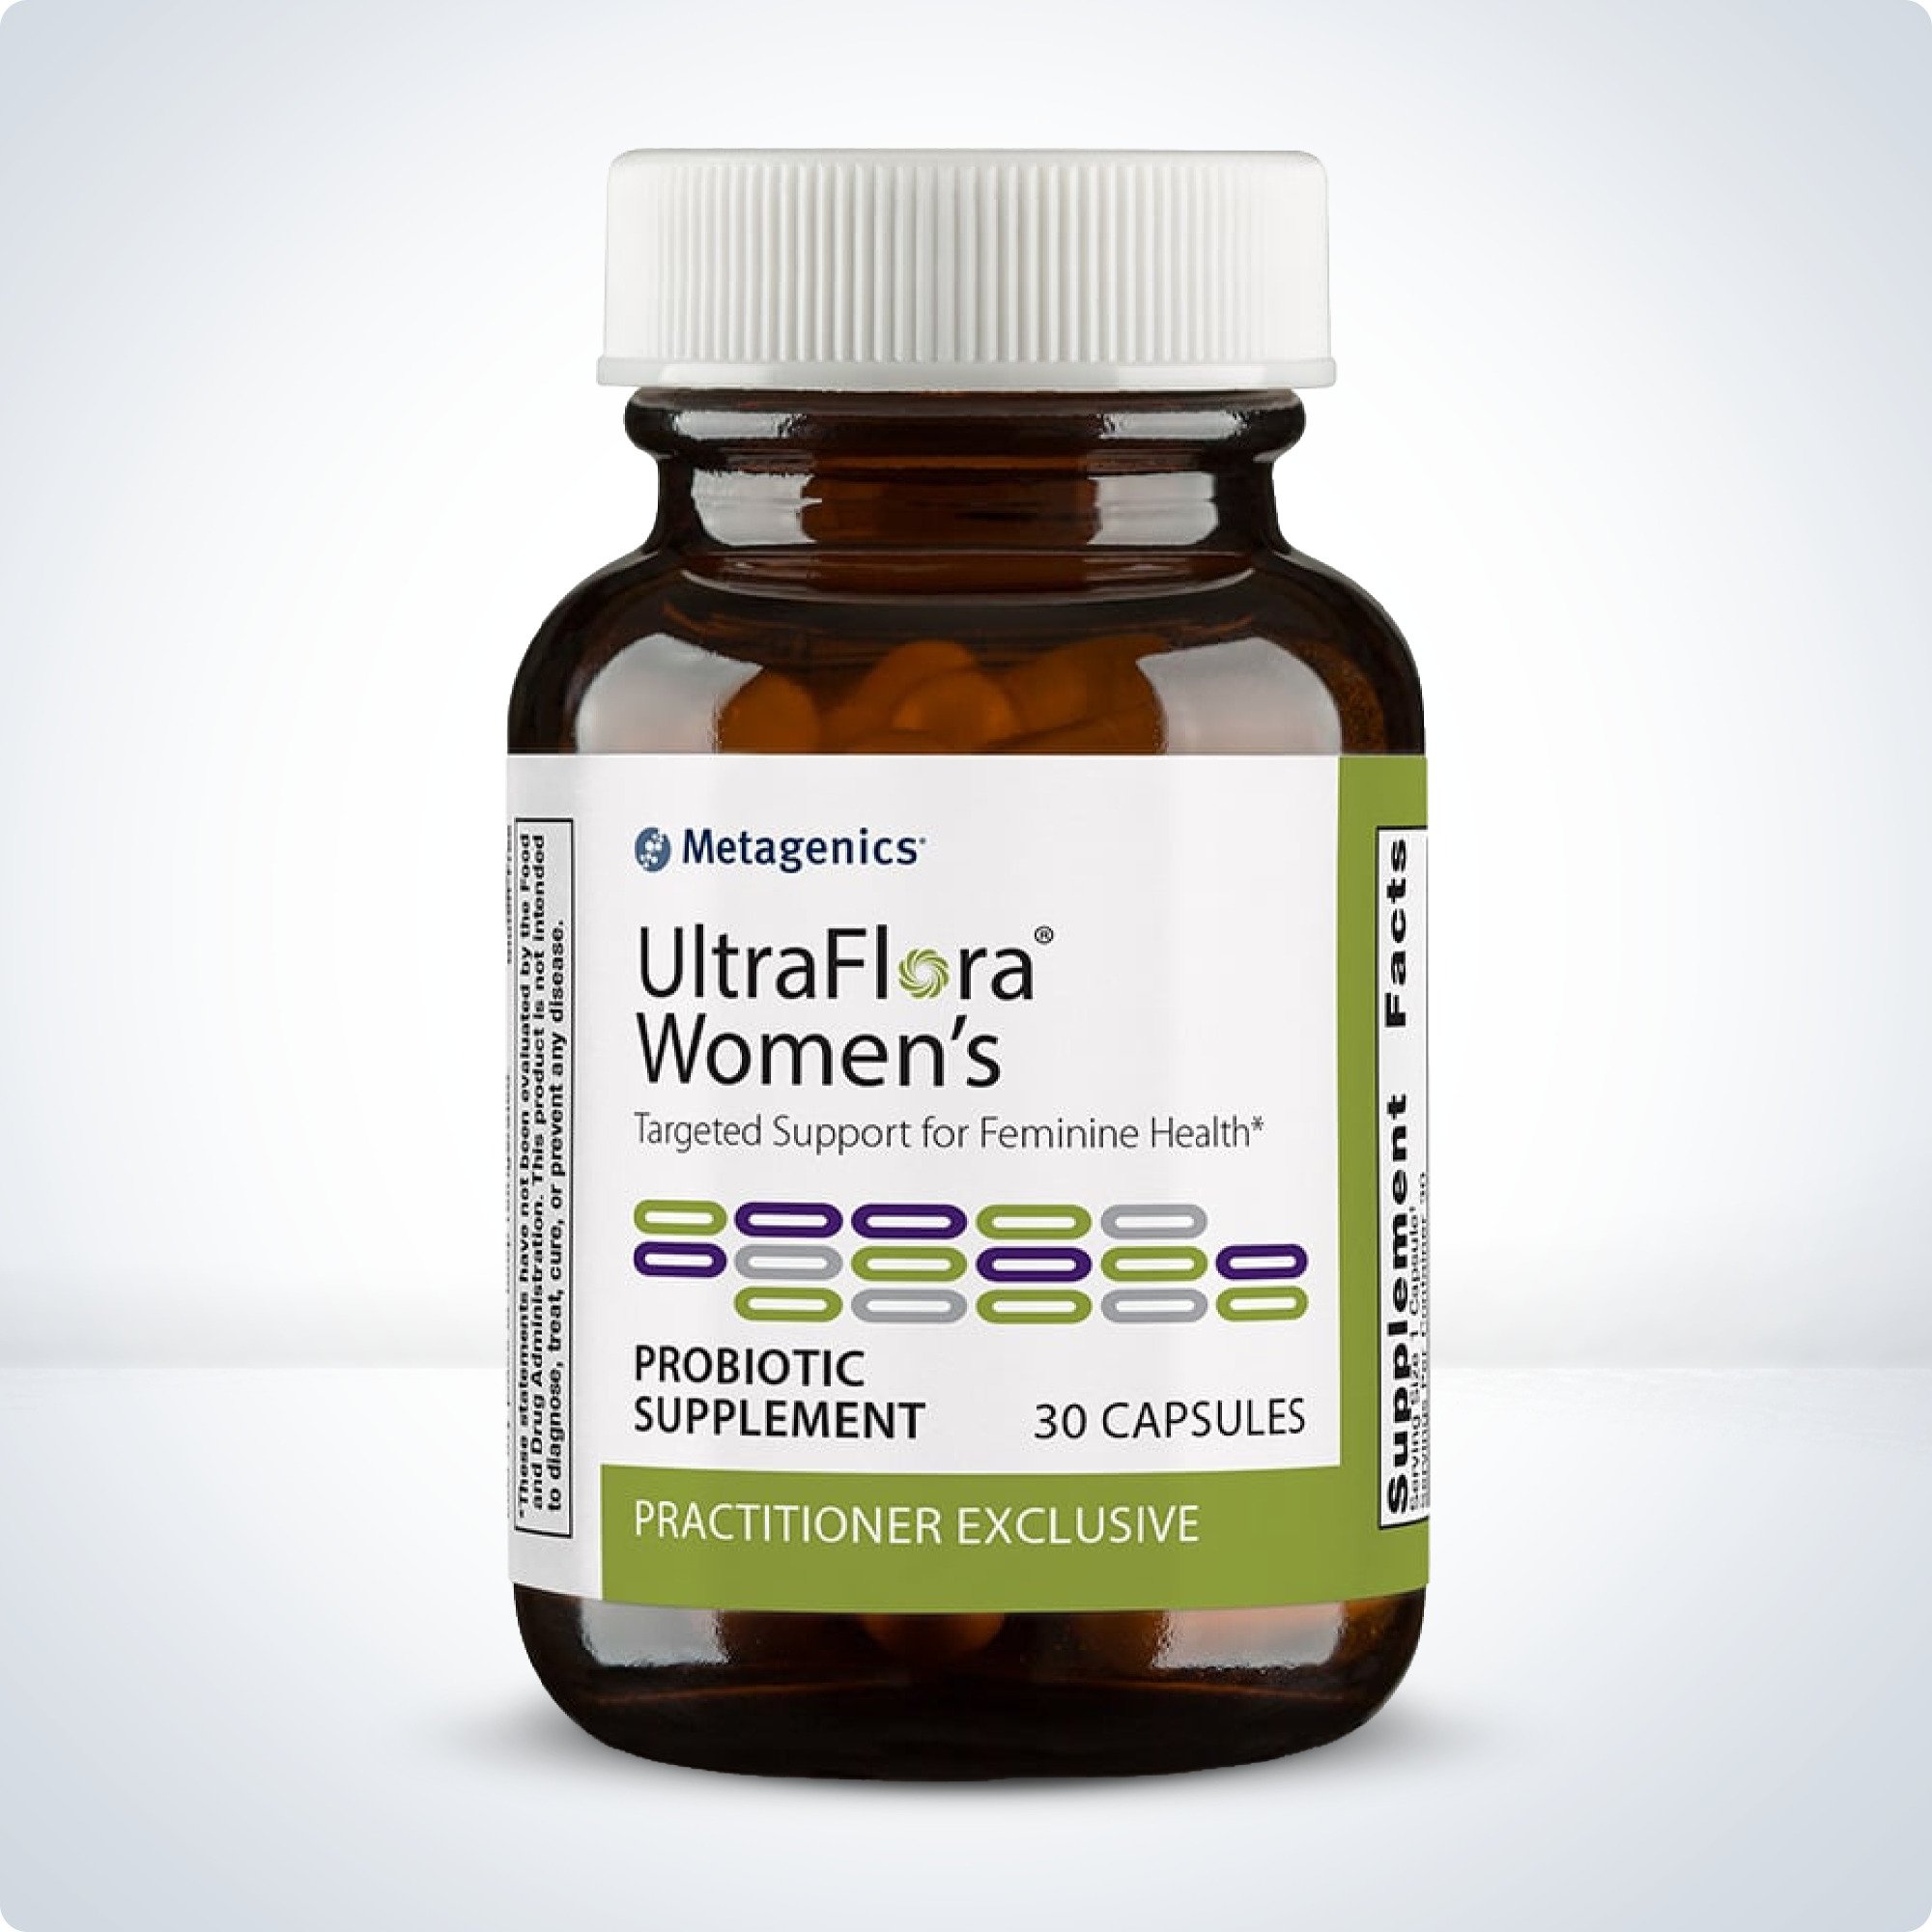 UltraFlora® Women’s Probiotic Supports Urinary and Vaginal Health*